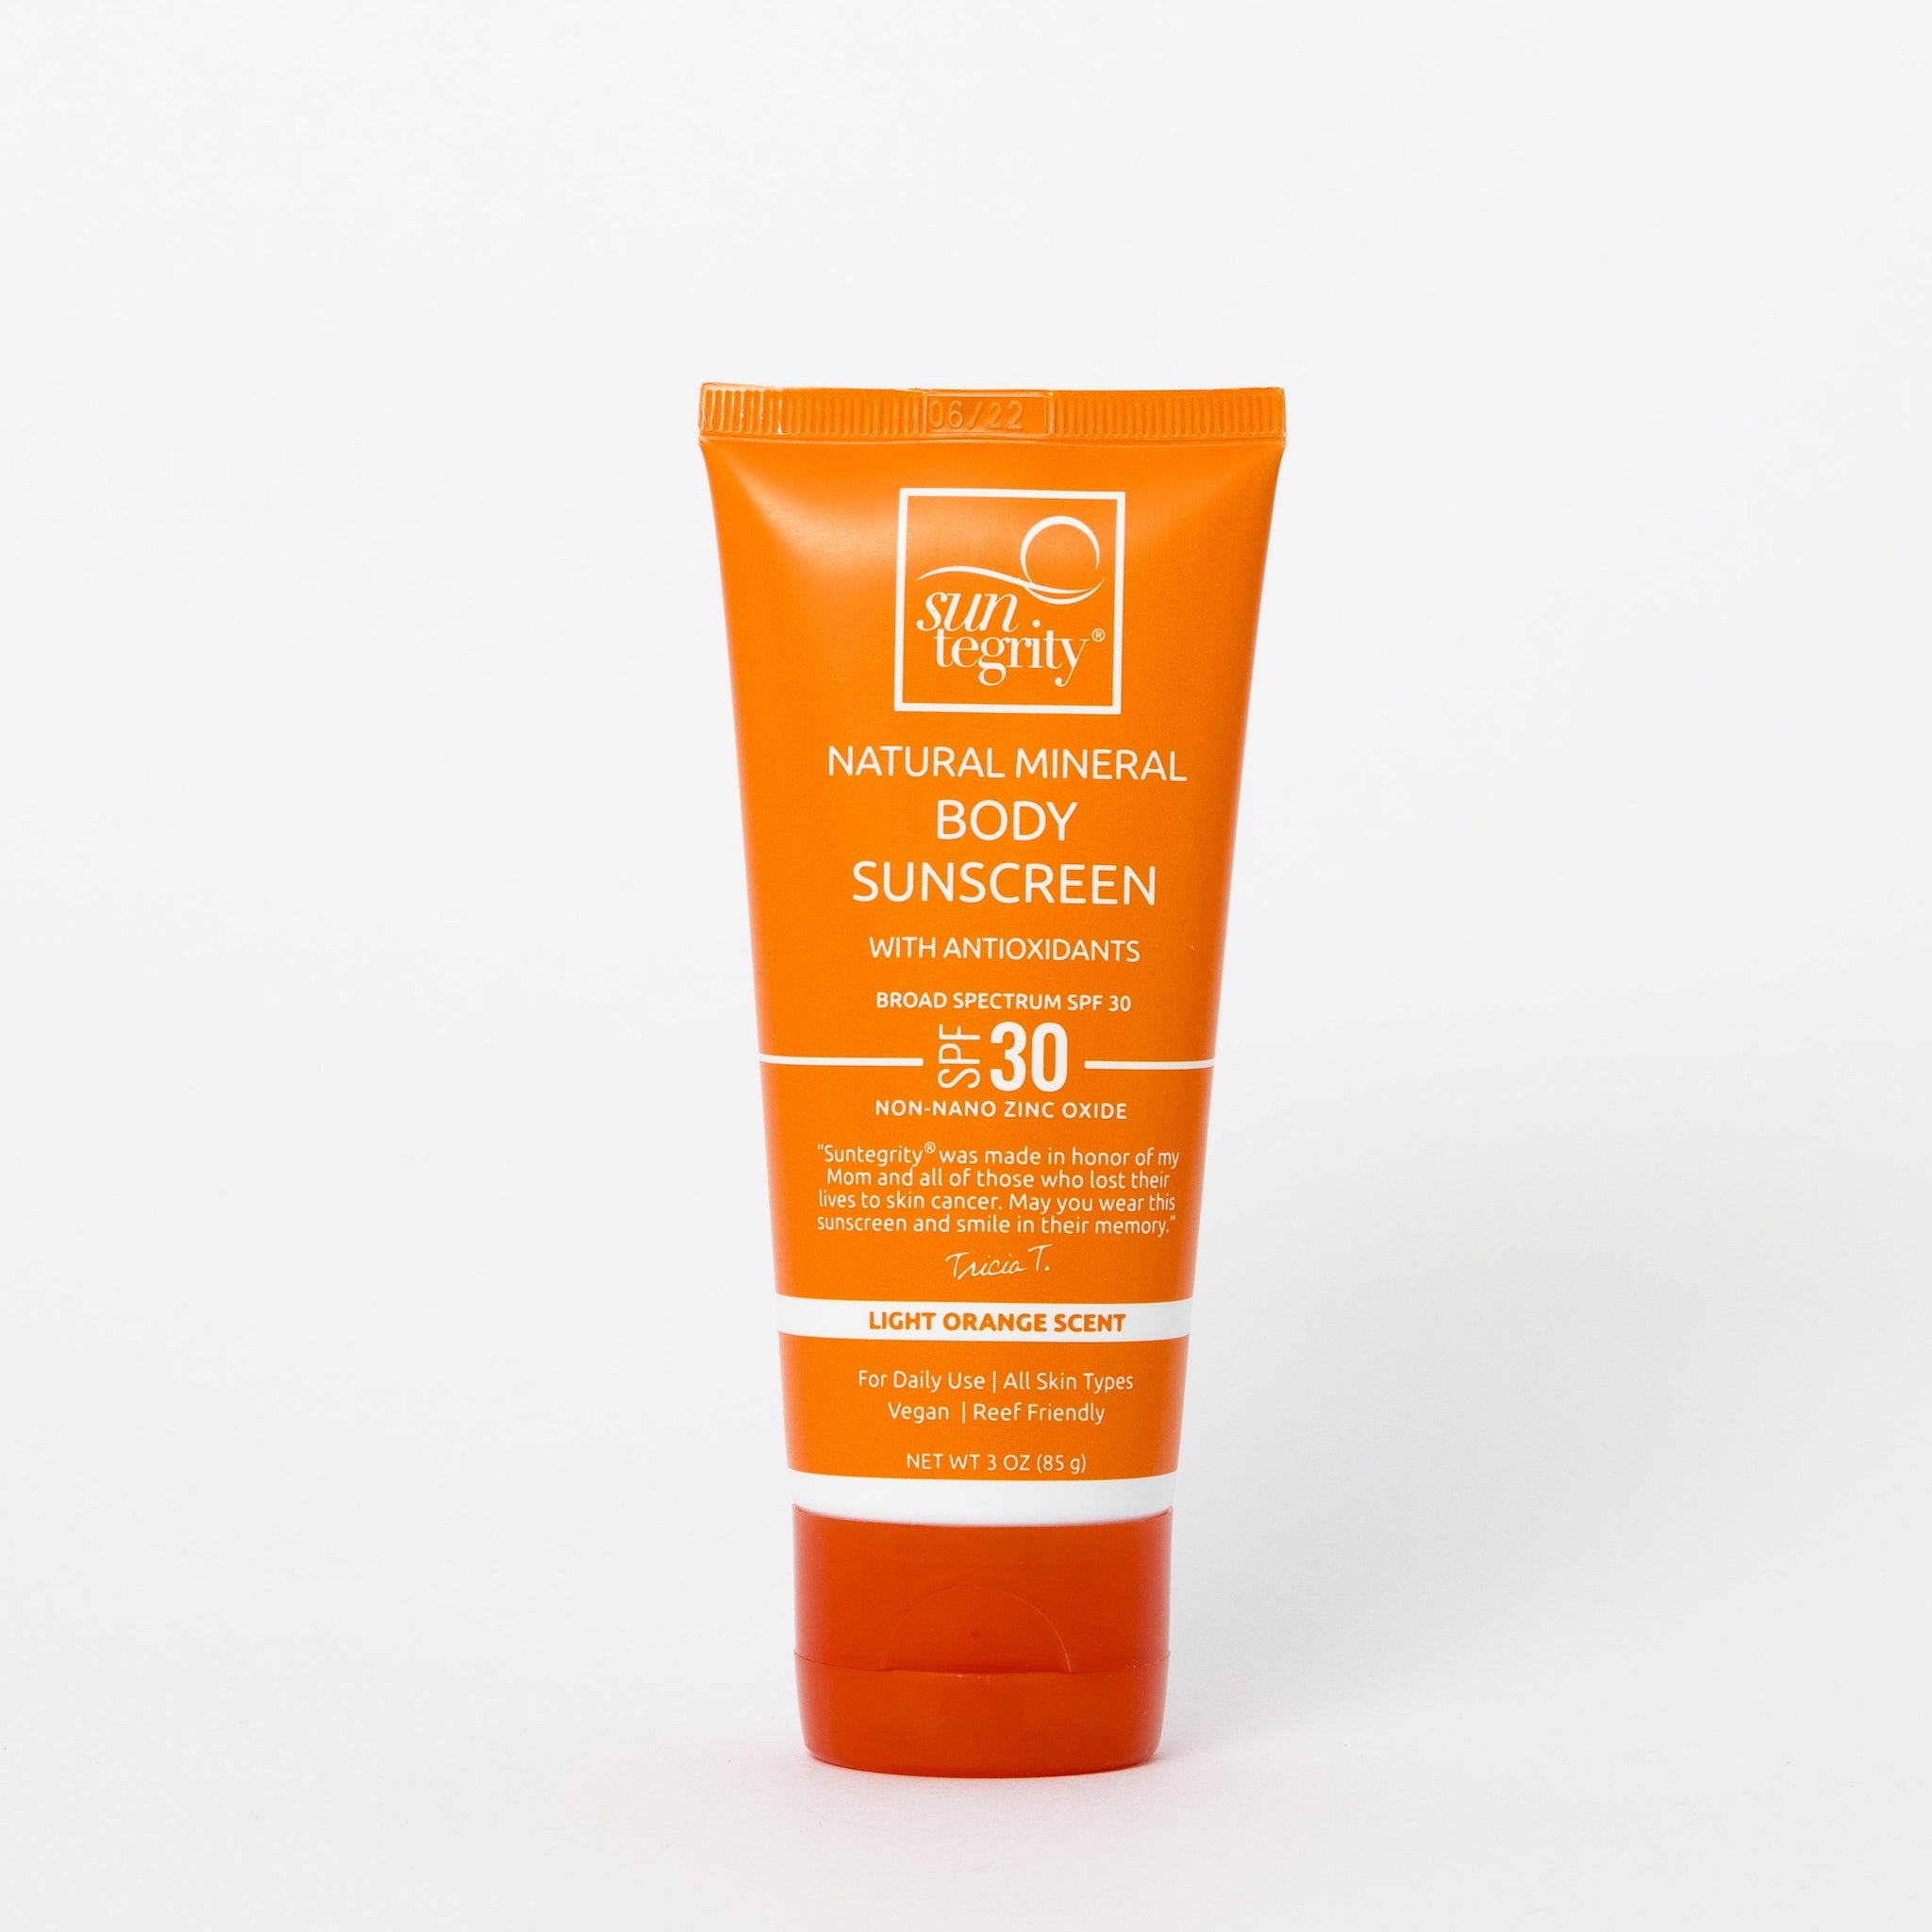 Natural Mineral Body Sunscreen - Broad Spectrum SPF 30